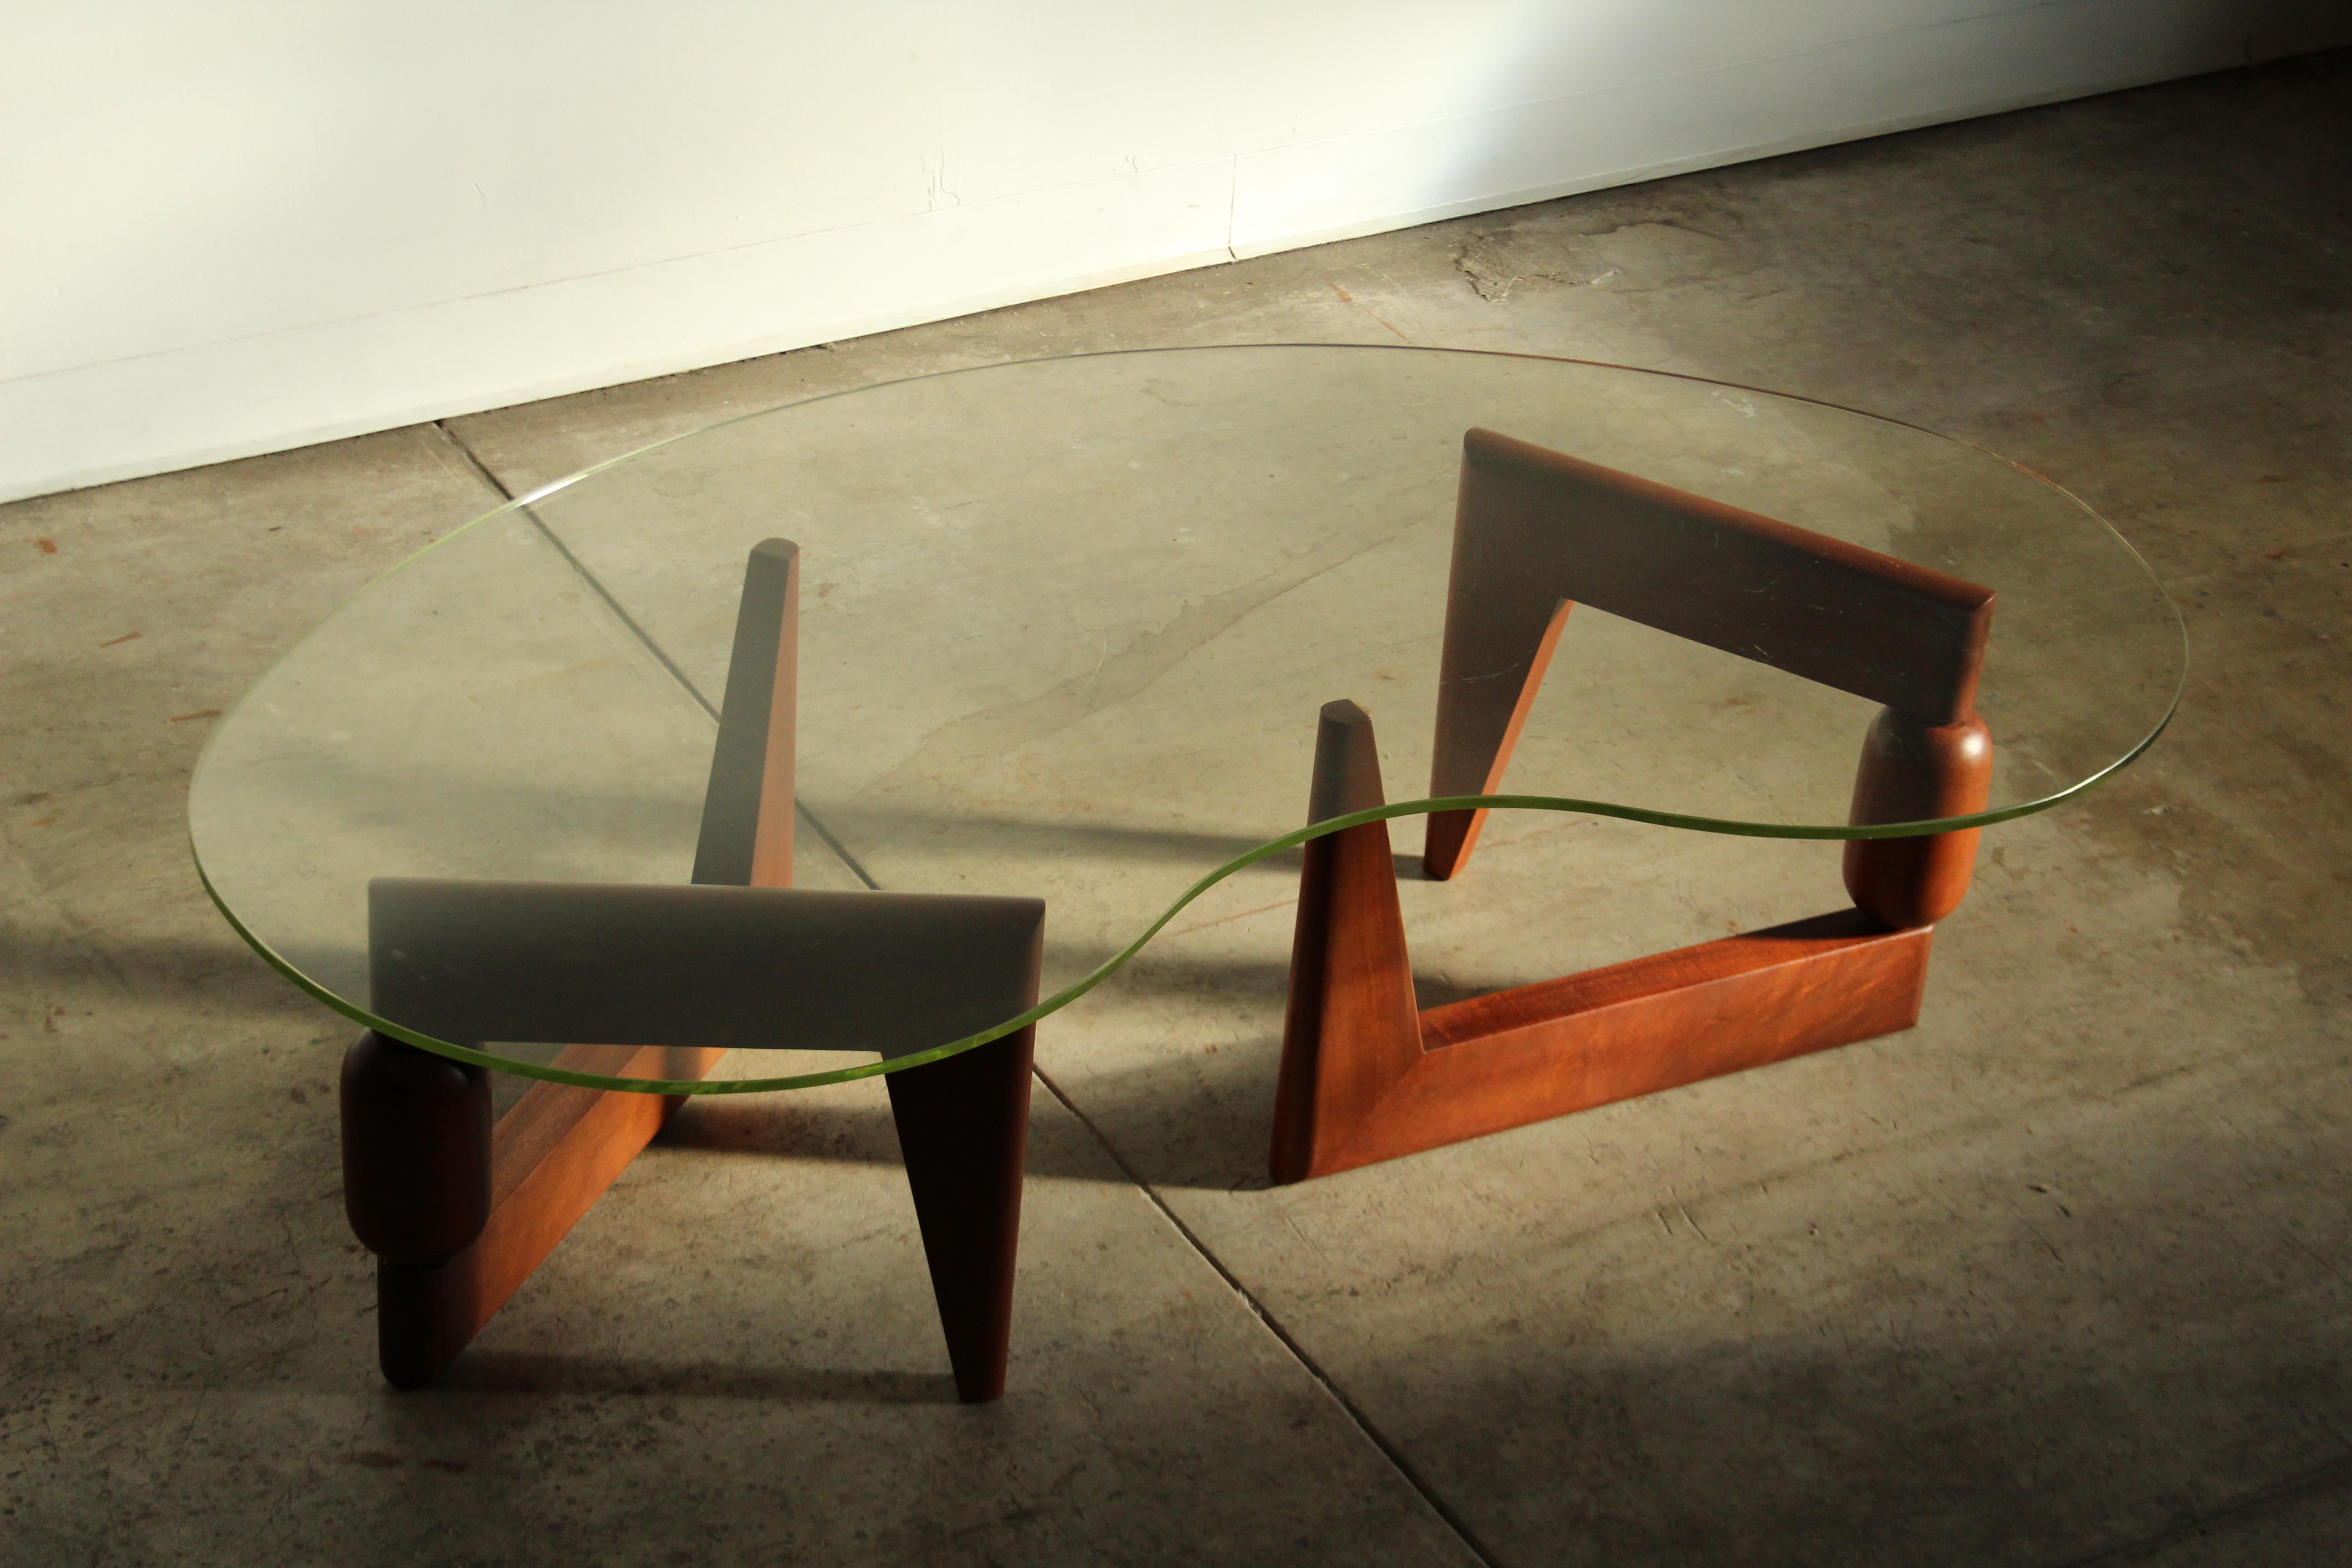 Sculptural Freeform Coffee Table in the Manner of Isamu Noguchi, 1970s For Sale 4